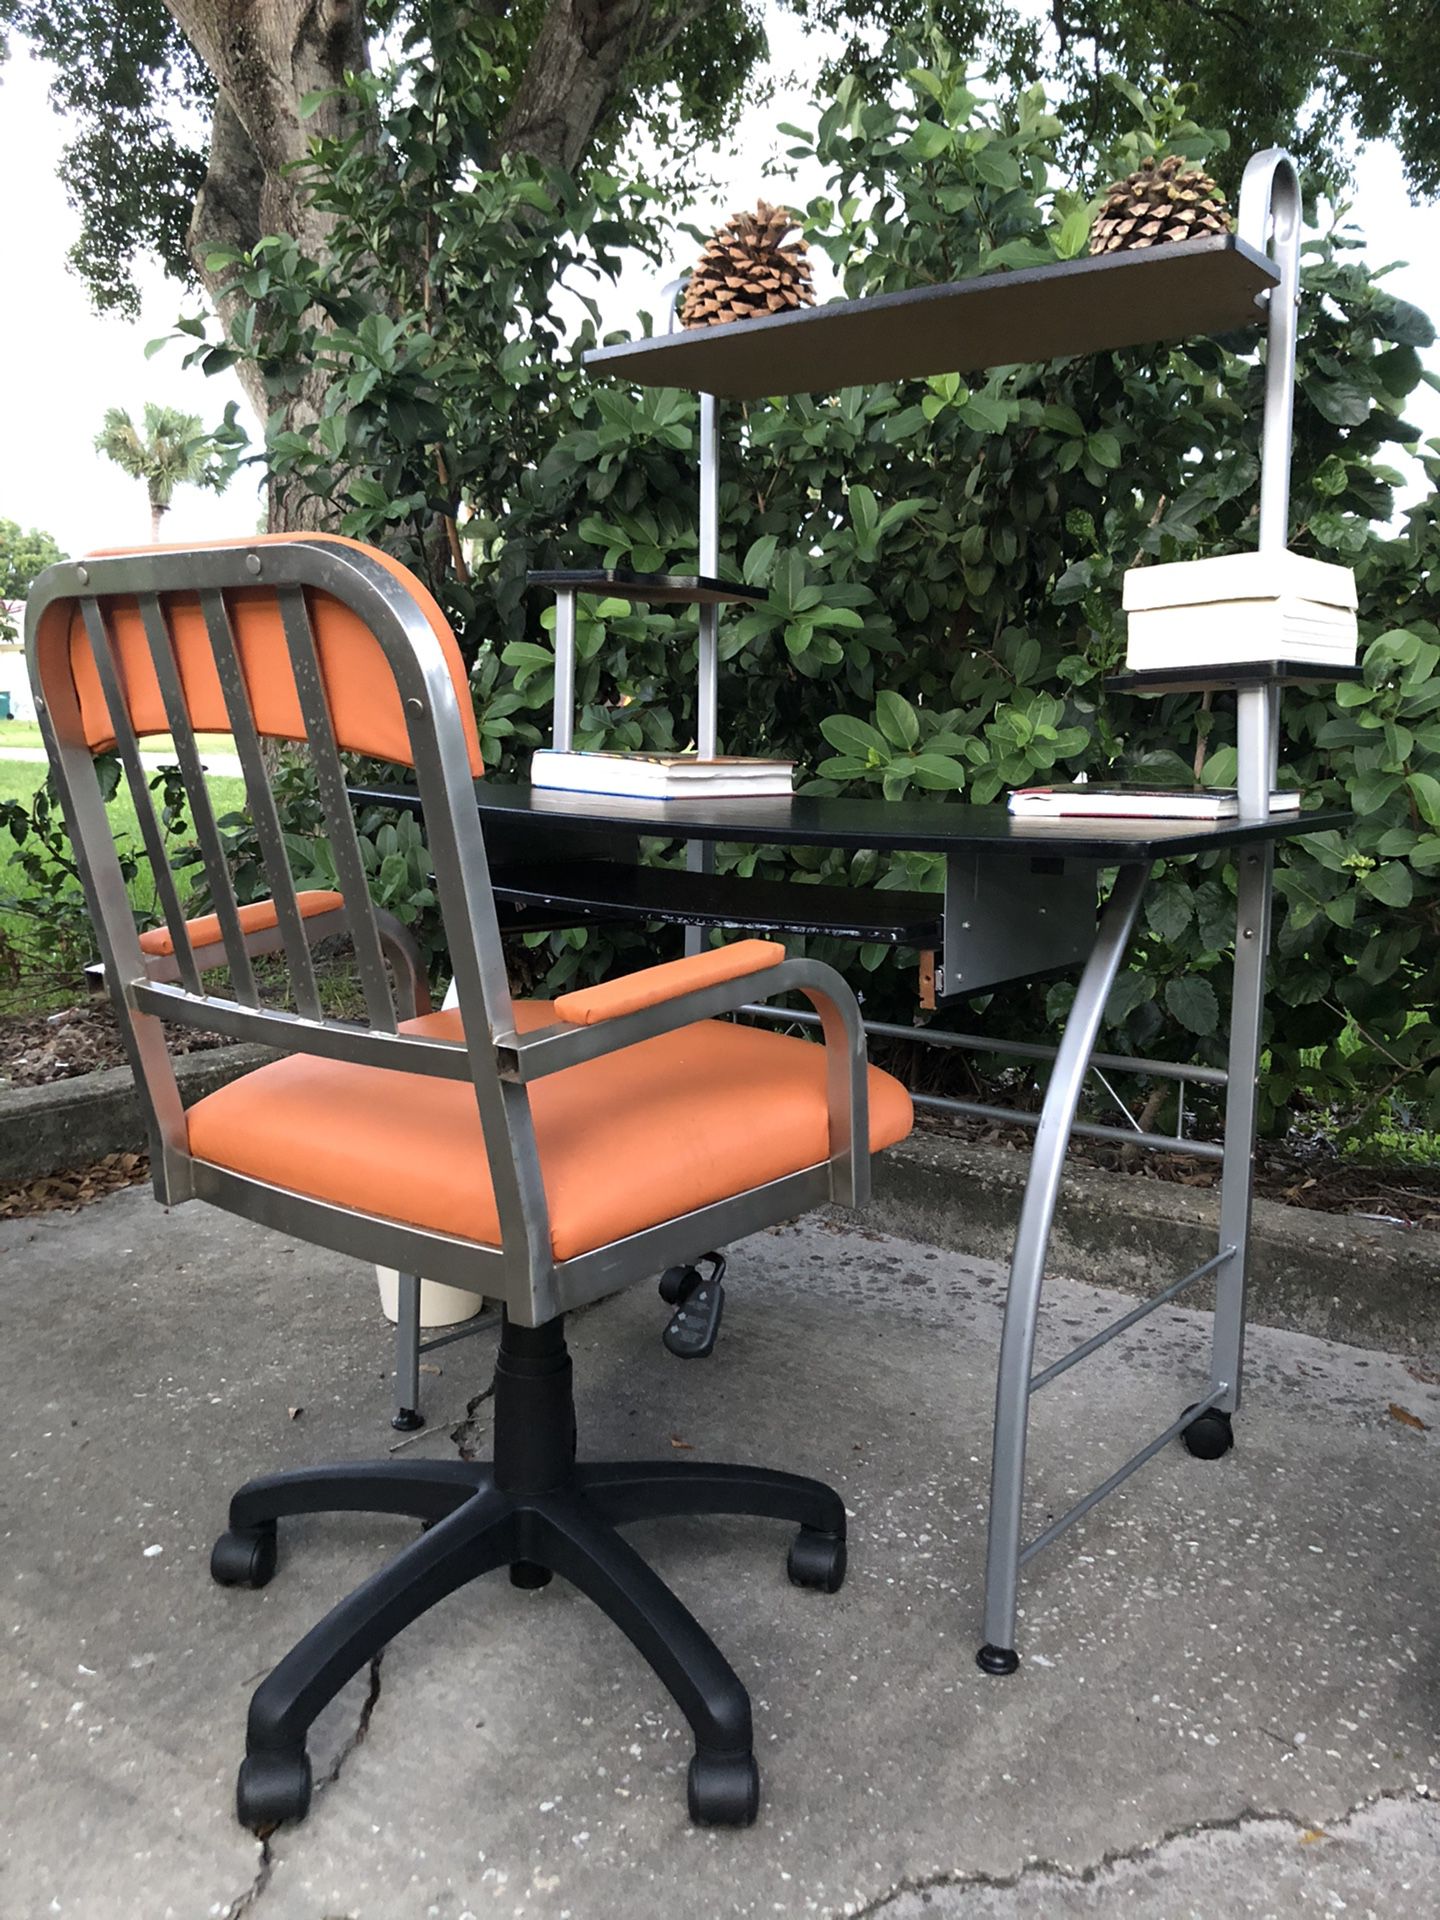 Study and computer table with orang lather chair